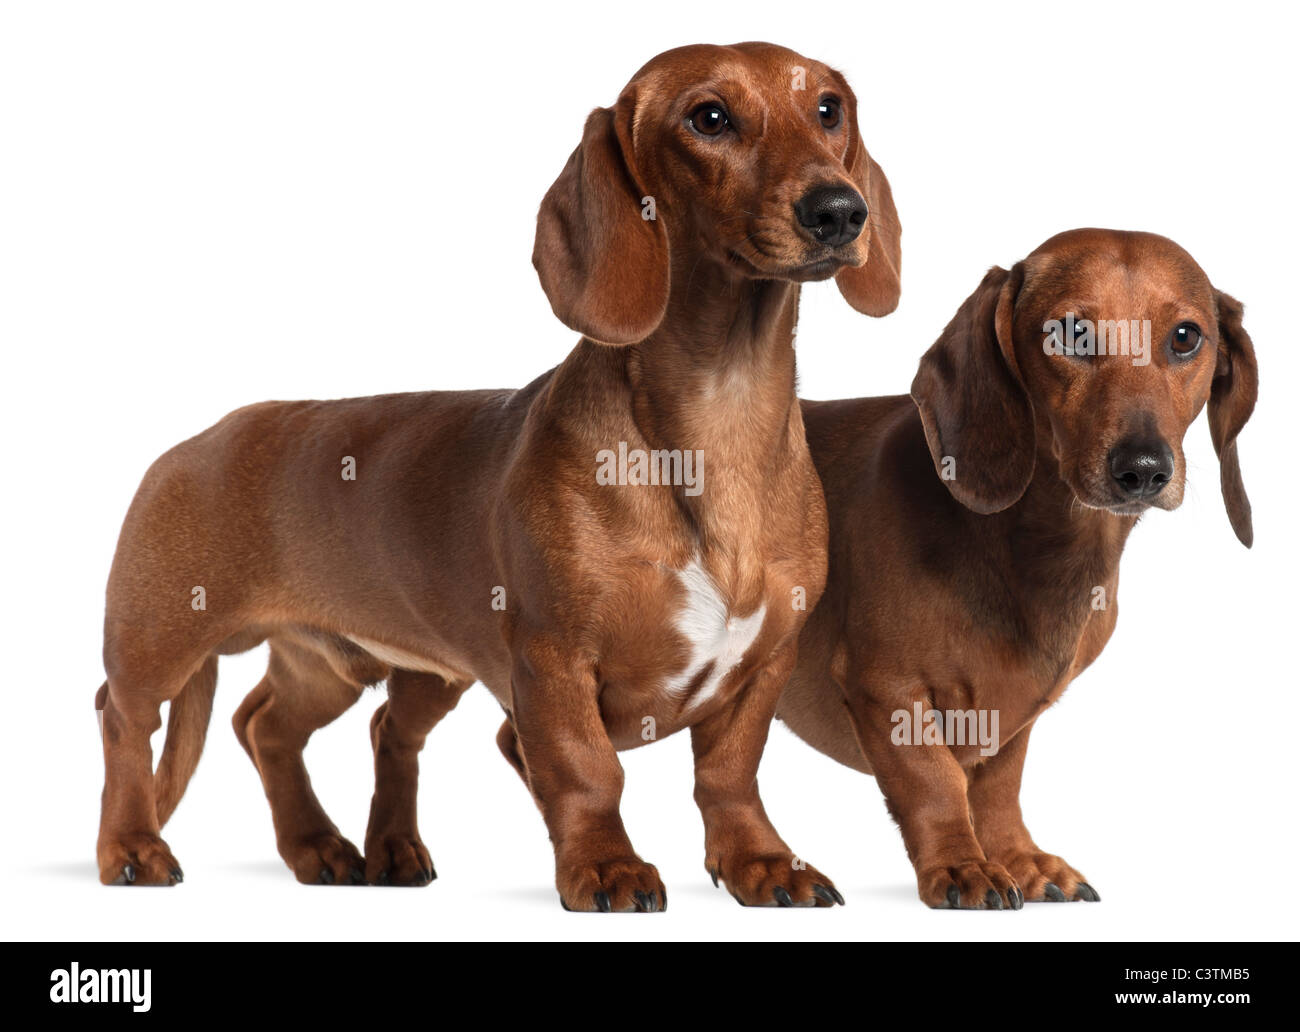 Dachshunds, 4 years old and 7 months old, standing in front of white background Stock Photo